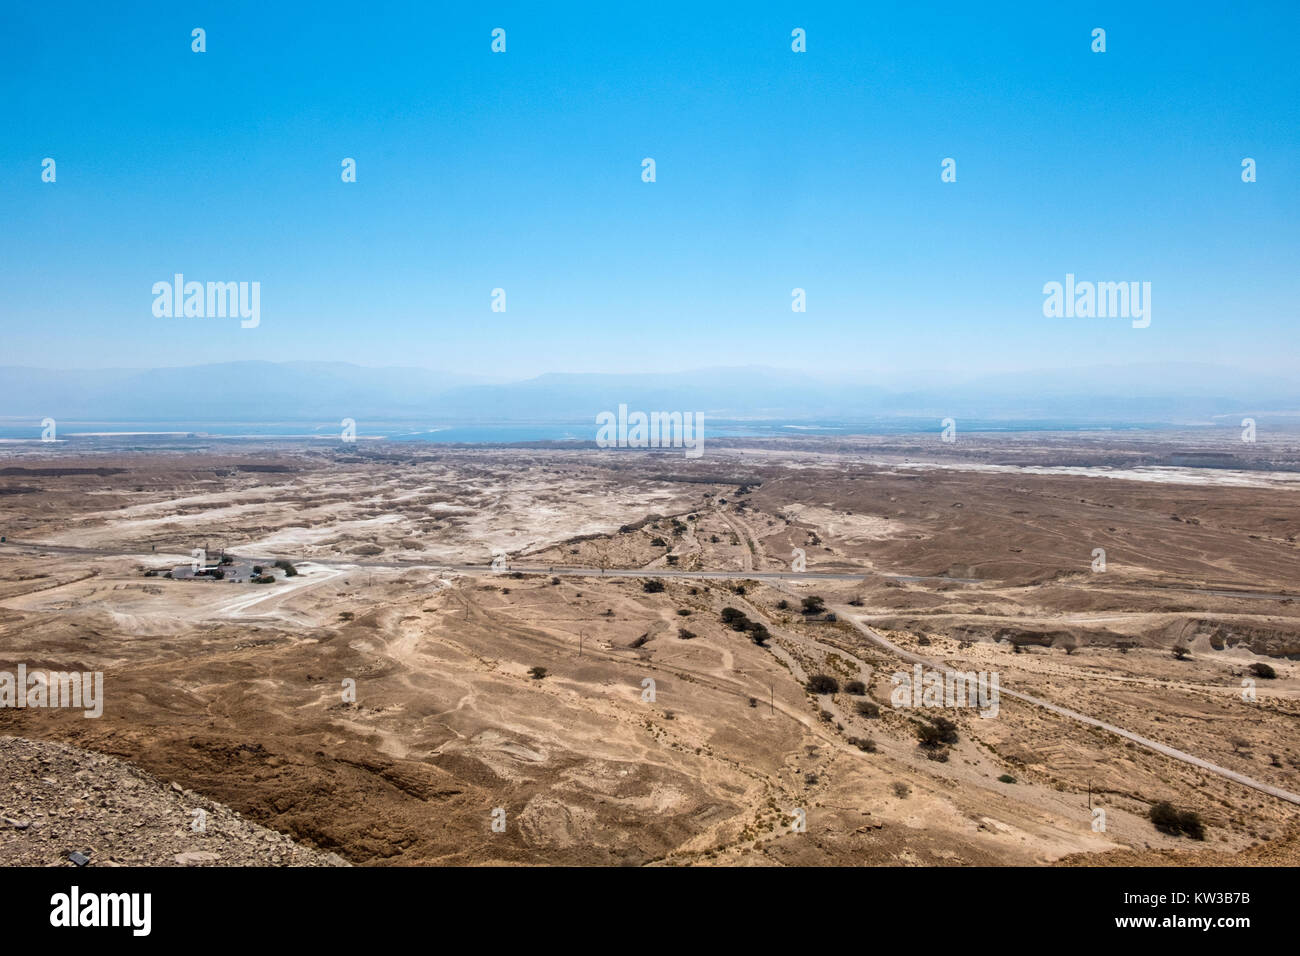 The Arava valley and the shore of the Dead Sea in the background in the haze can be seen the ridges of the Edom Mountains Stock Photo